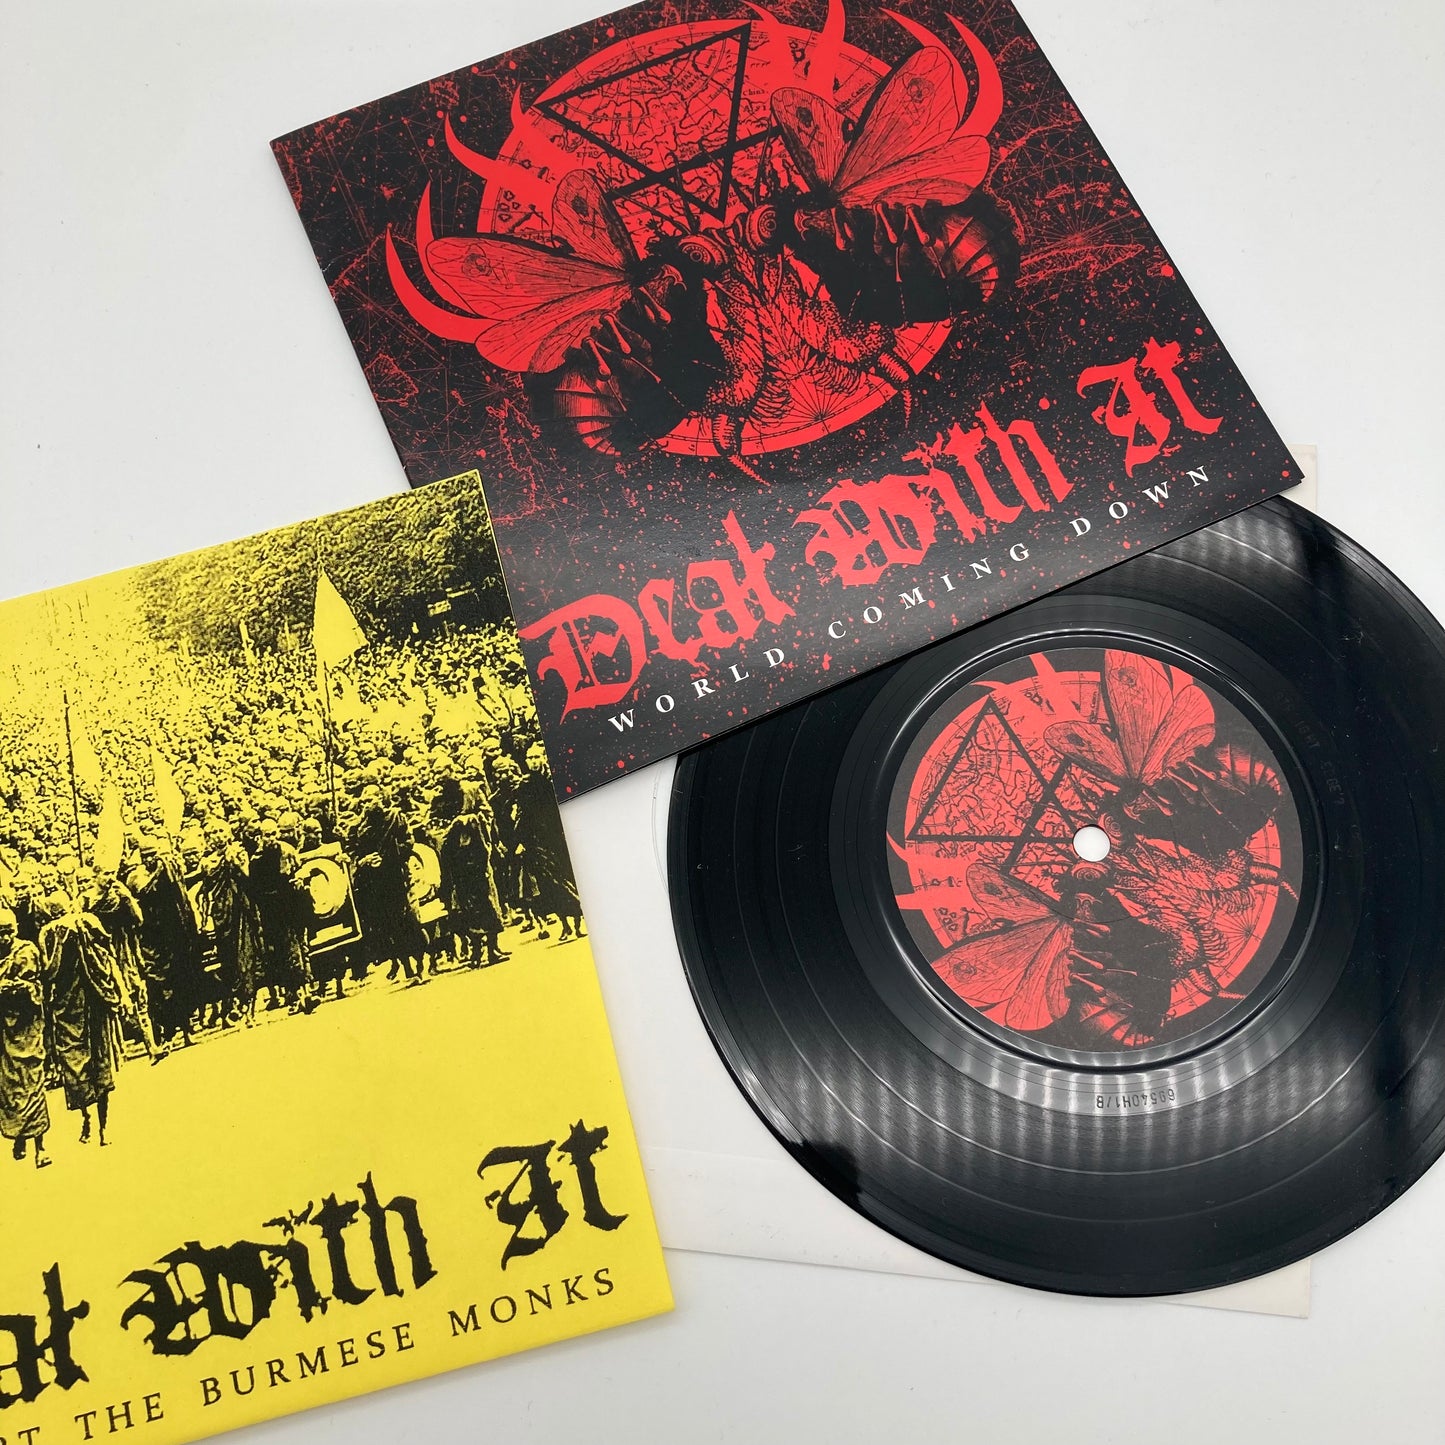 DEAL WITH IT • World Coming Down (Black Vinyl, lim. Ninjafest 2007 Edition) • 7" • Second Hand